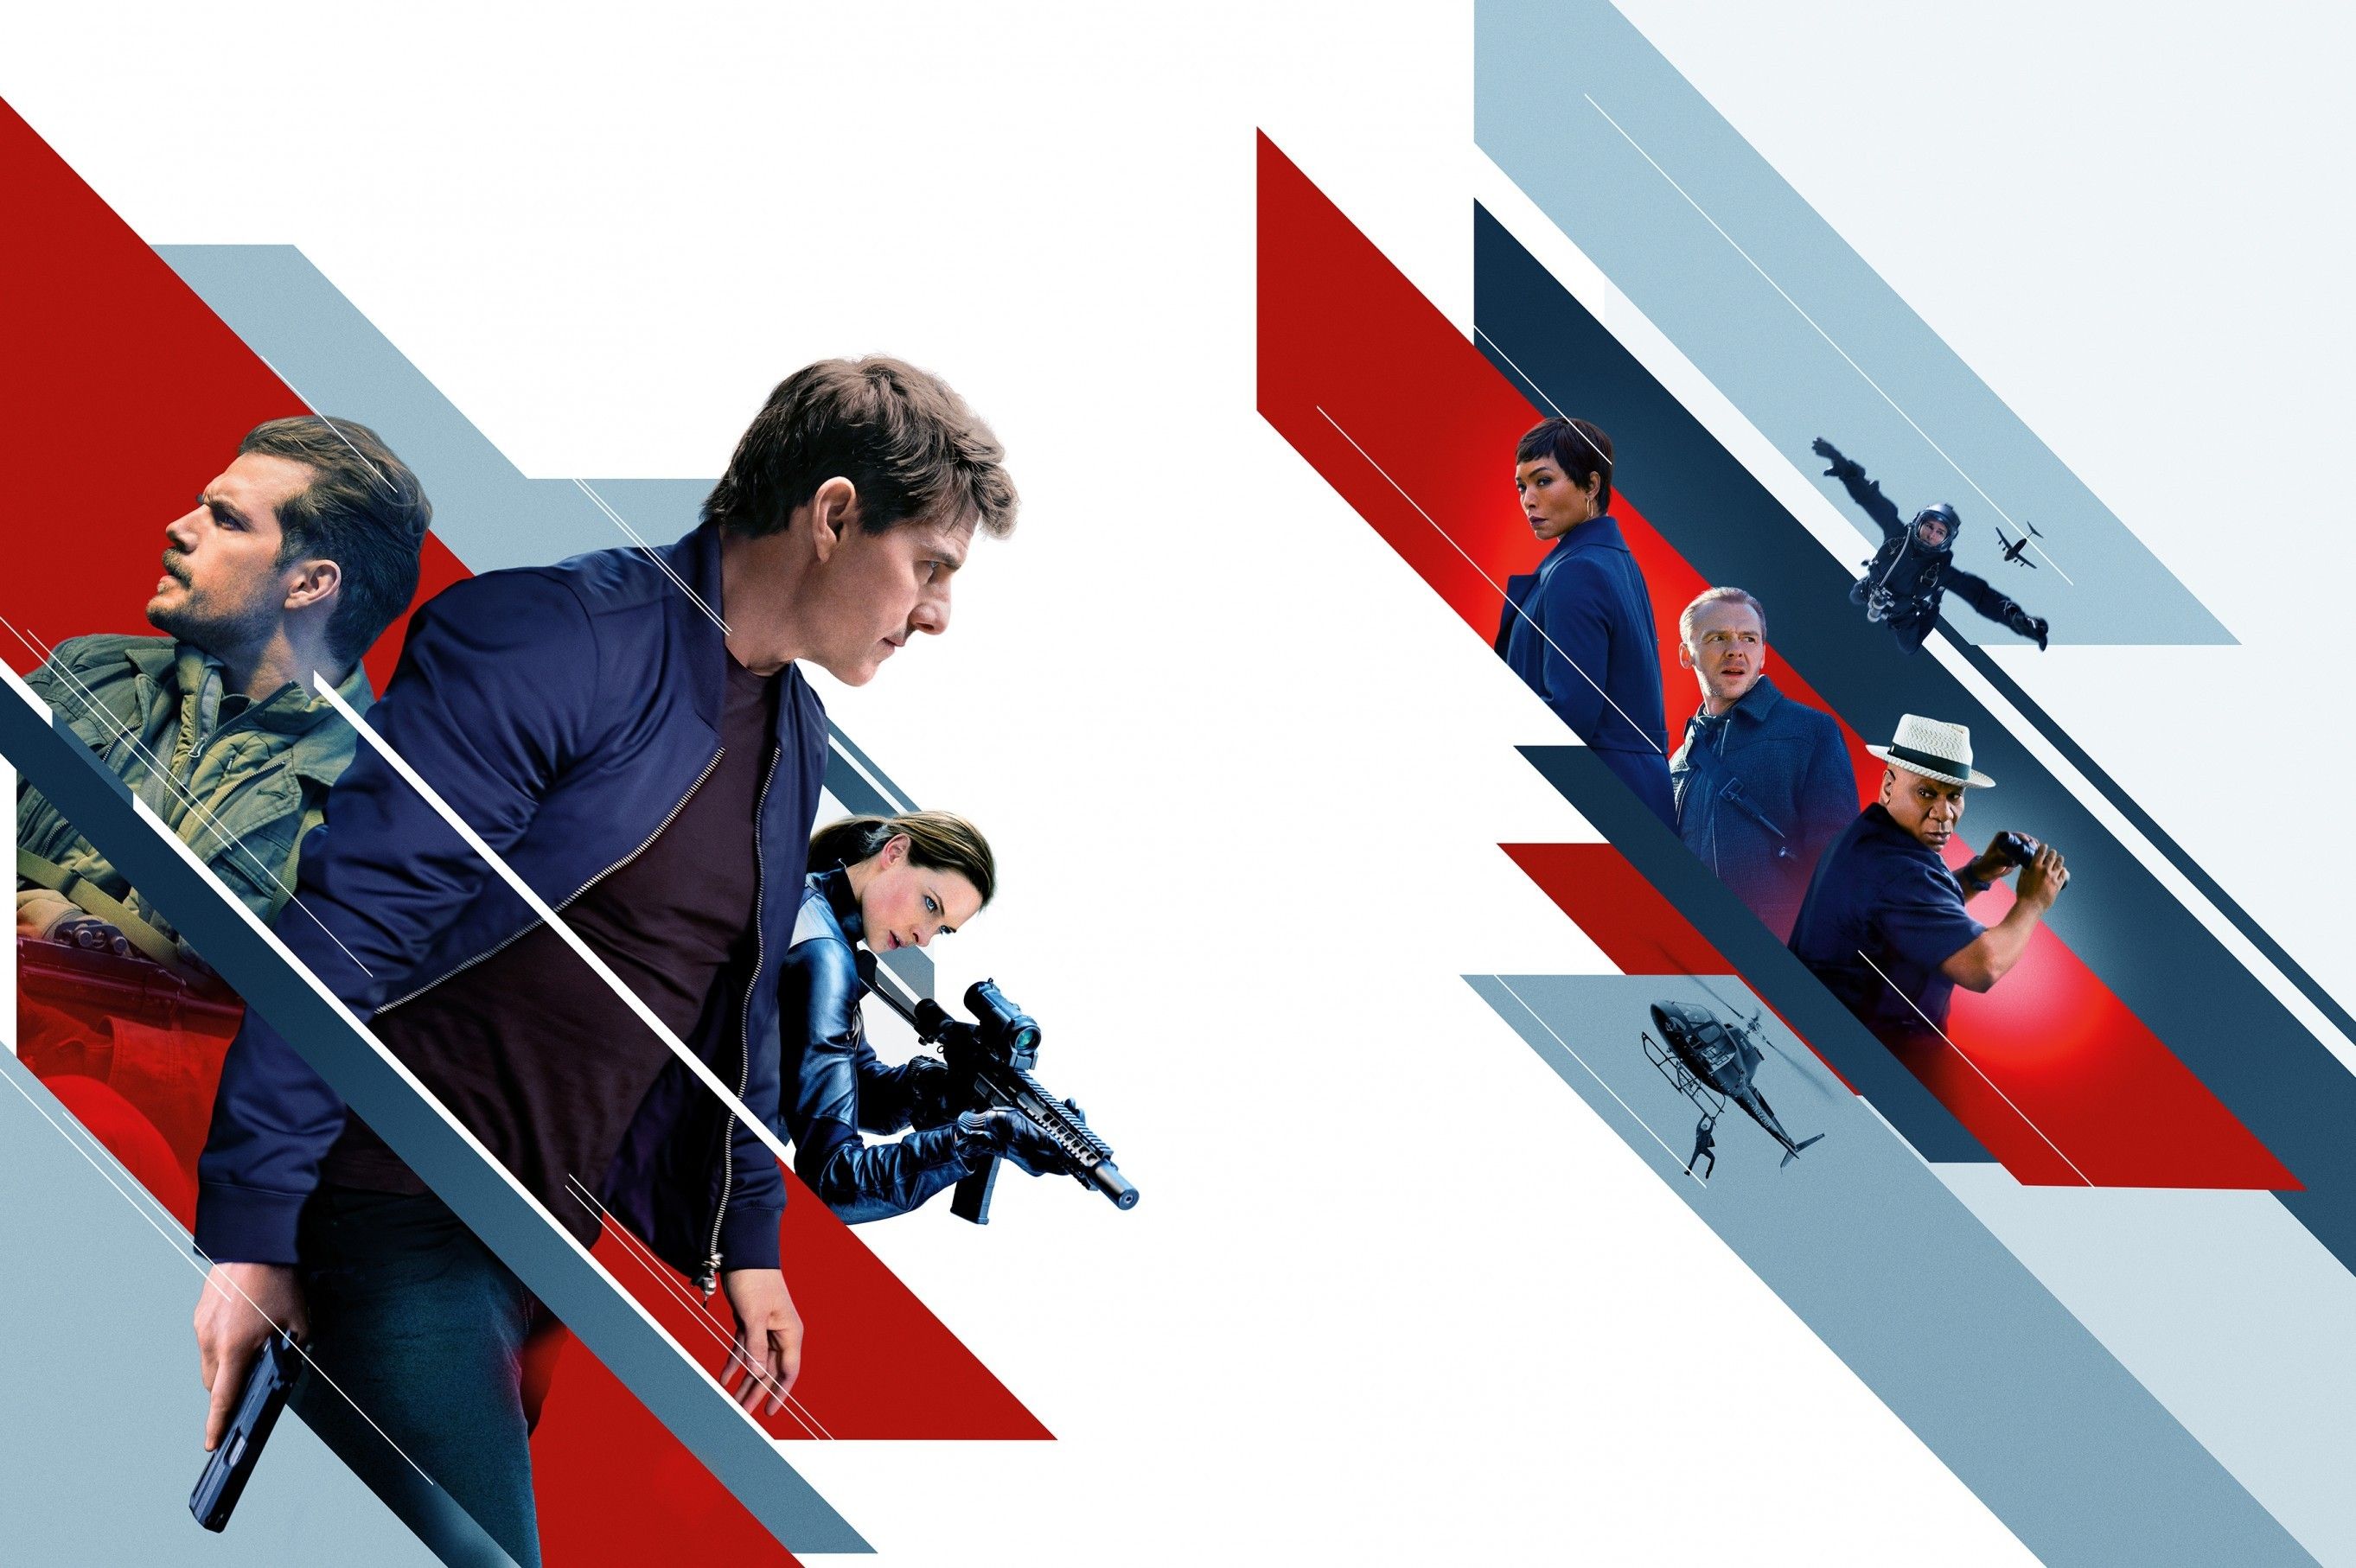 Download 2725x1814 Mission: Impossible Fallout, Tom Cruise